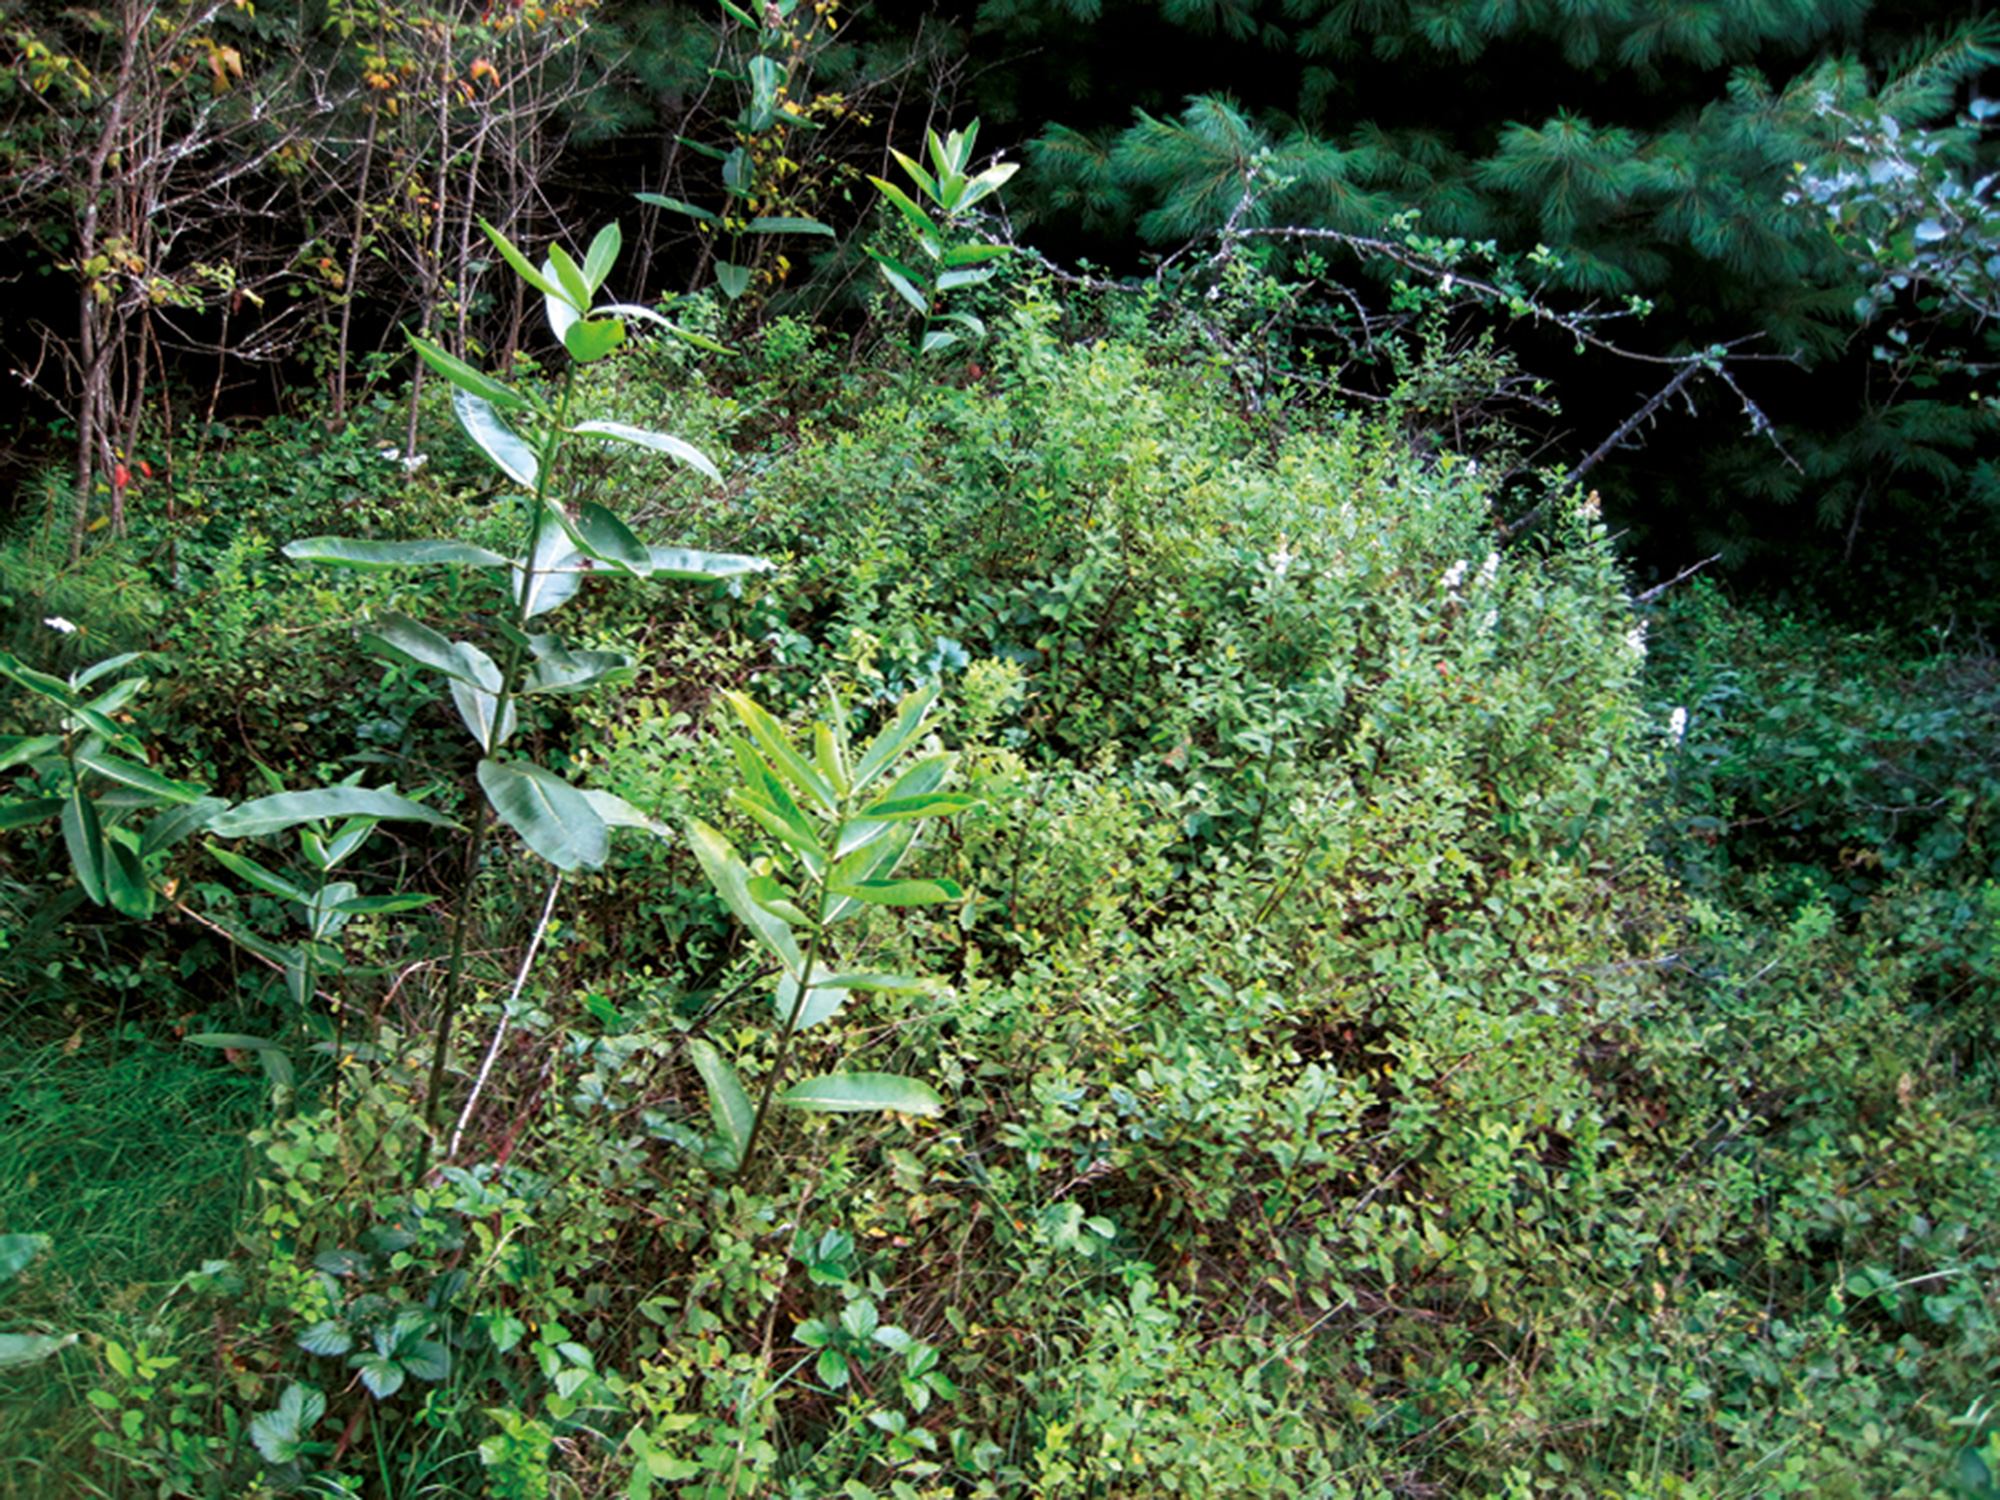 Unidentified overgrown earth mound, found deeper in the woods to the west, 2009. More work is needed.